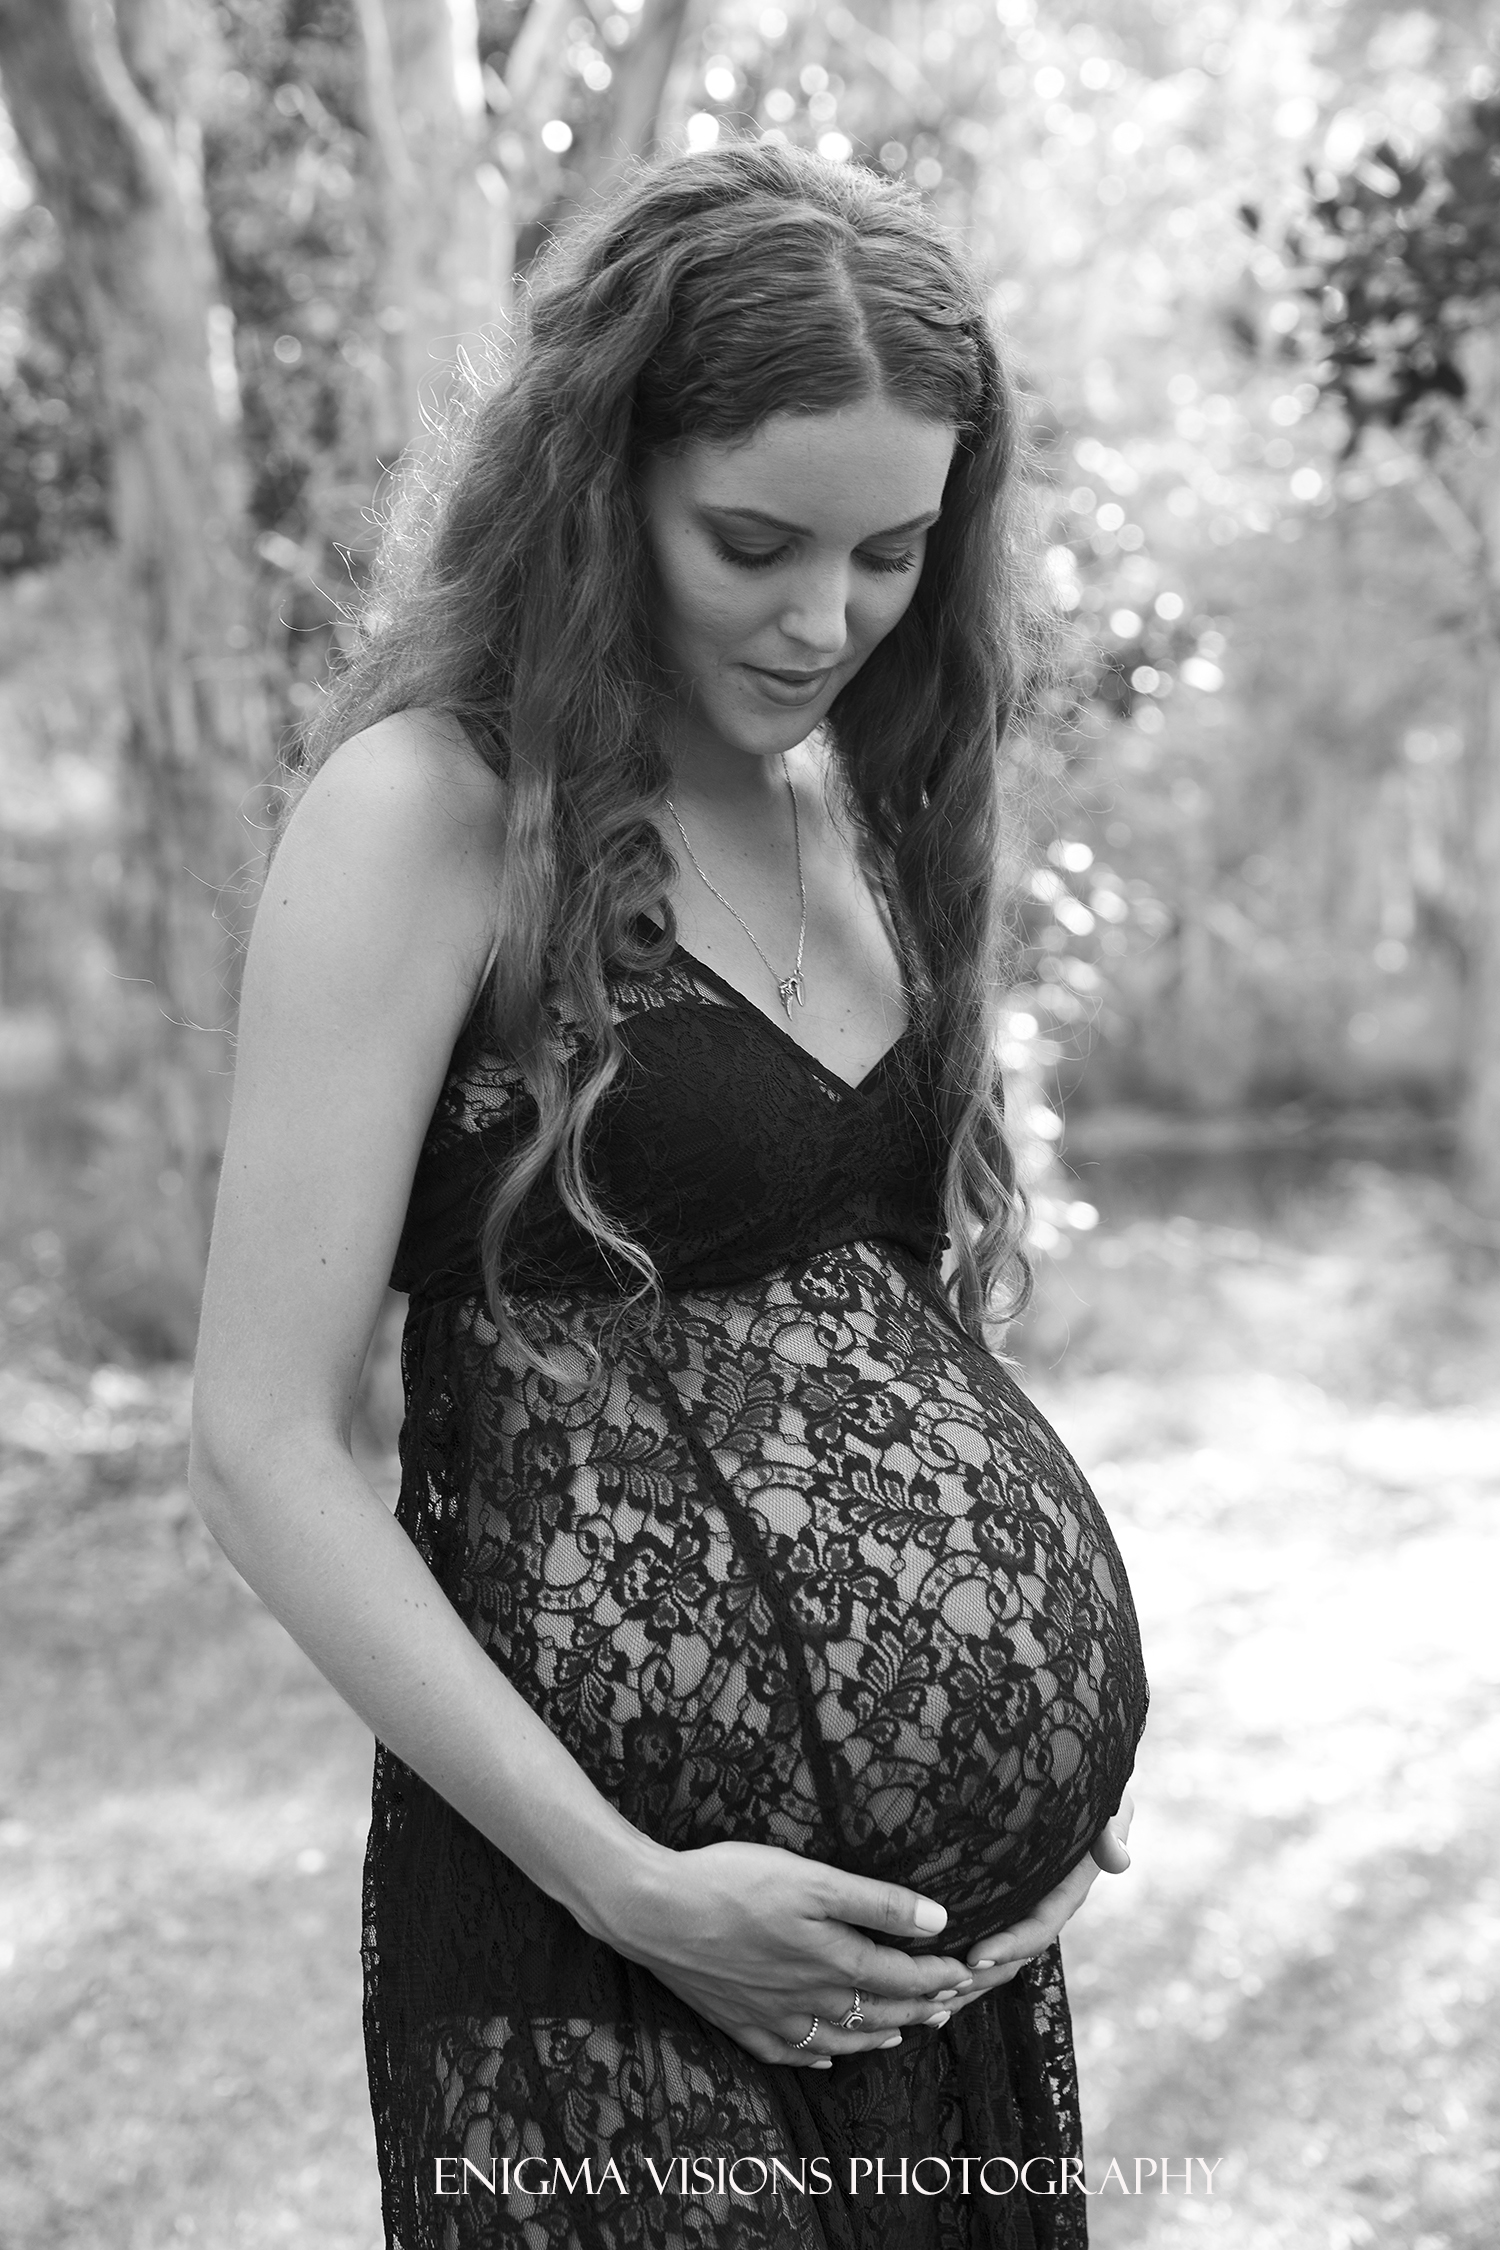 Enigma_Visions_Photography_Maternity_Mahlea008.jpg